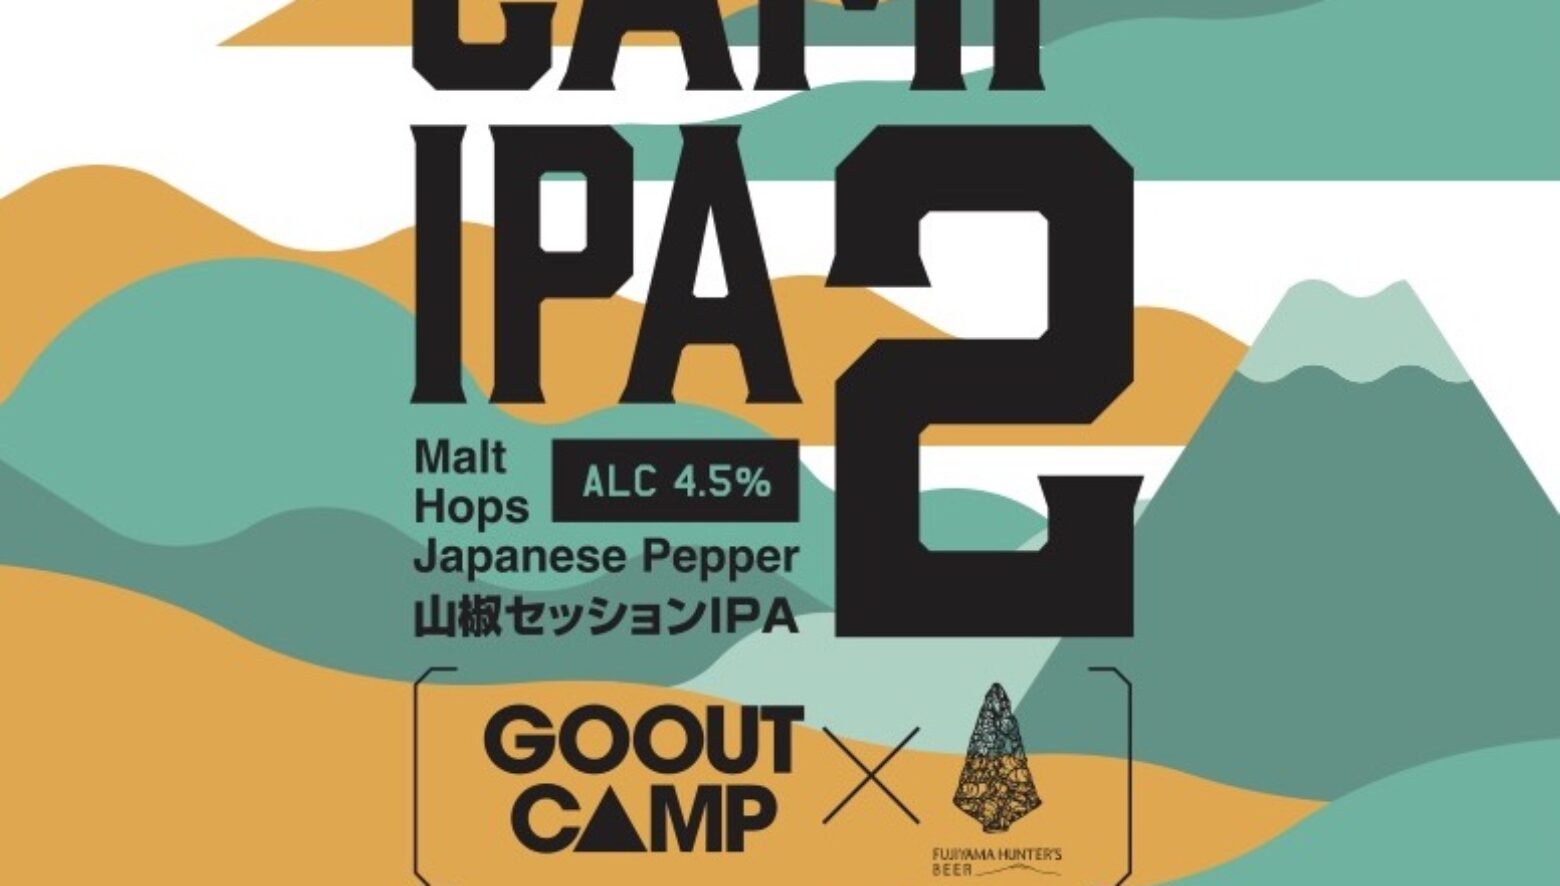 GO OUTのクラフトビール発売決定!! GO OUT CAMP vol.19開催記念で今回もFUJIYAMA HUNTERS BEERとのコラボビール が完成。